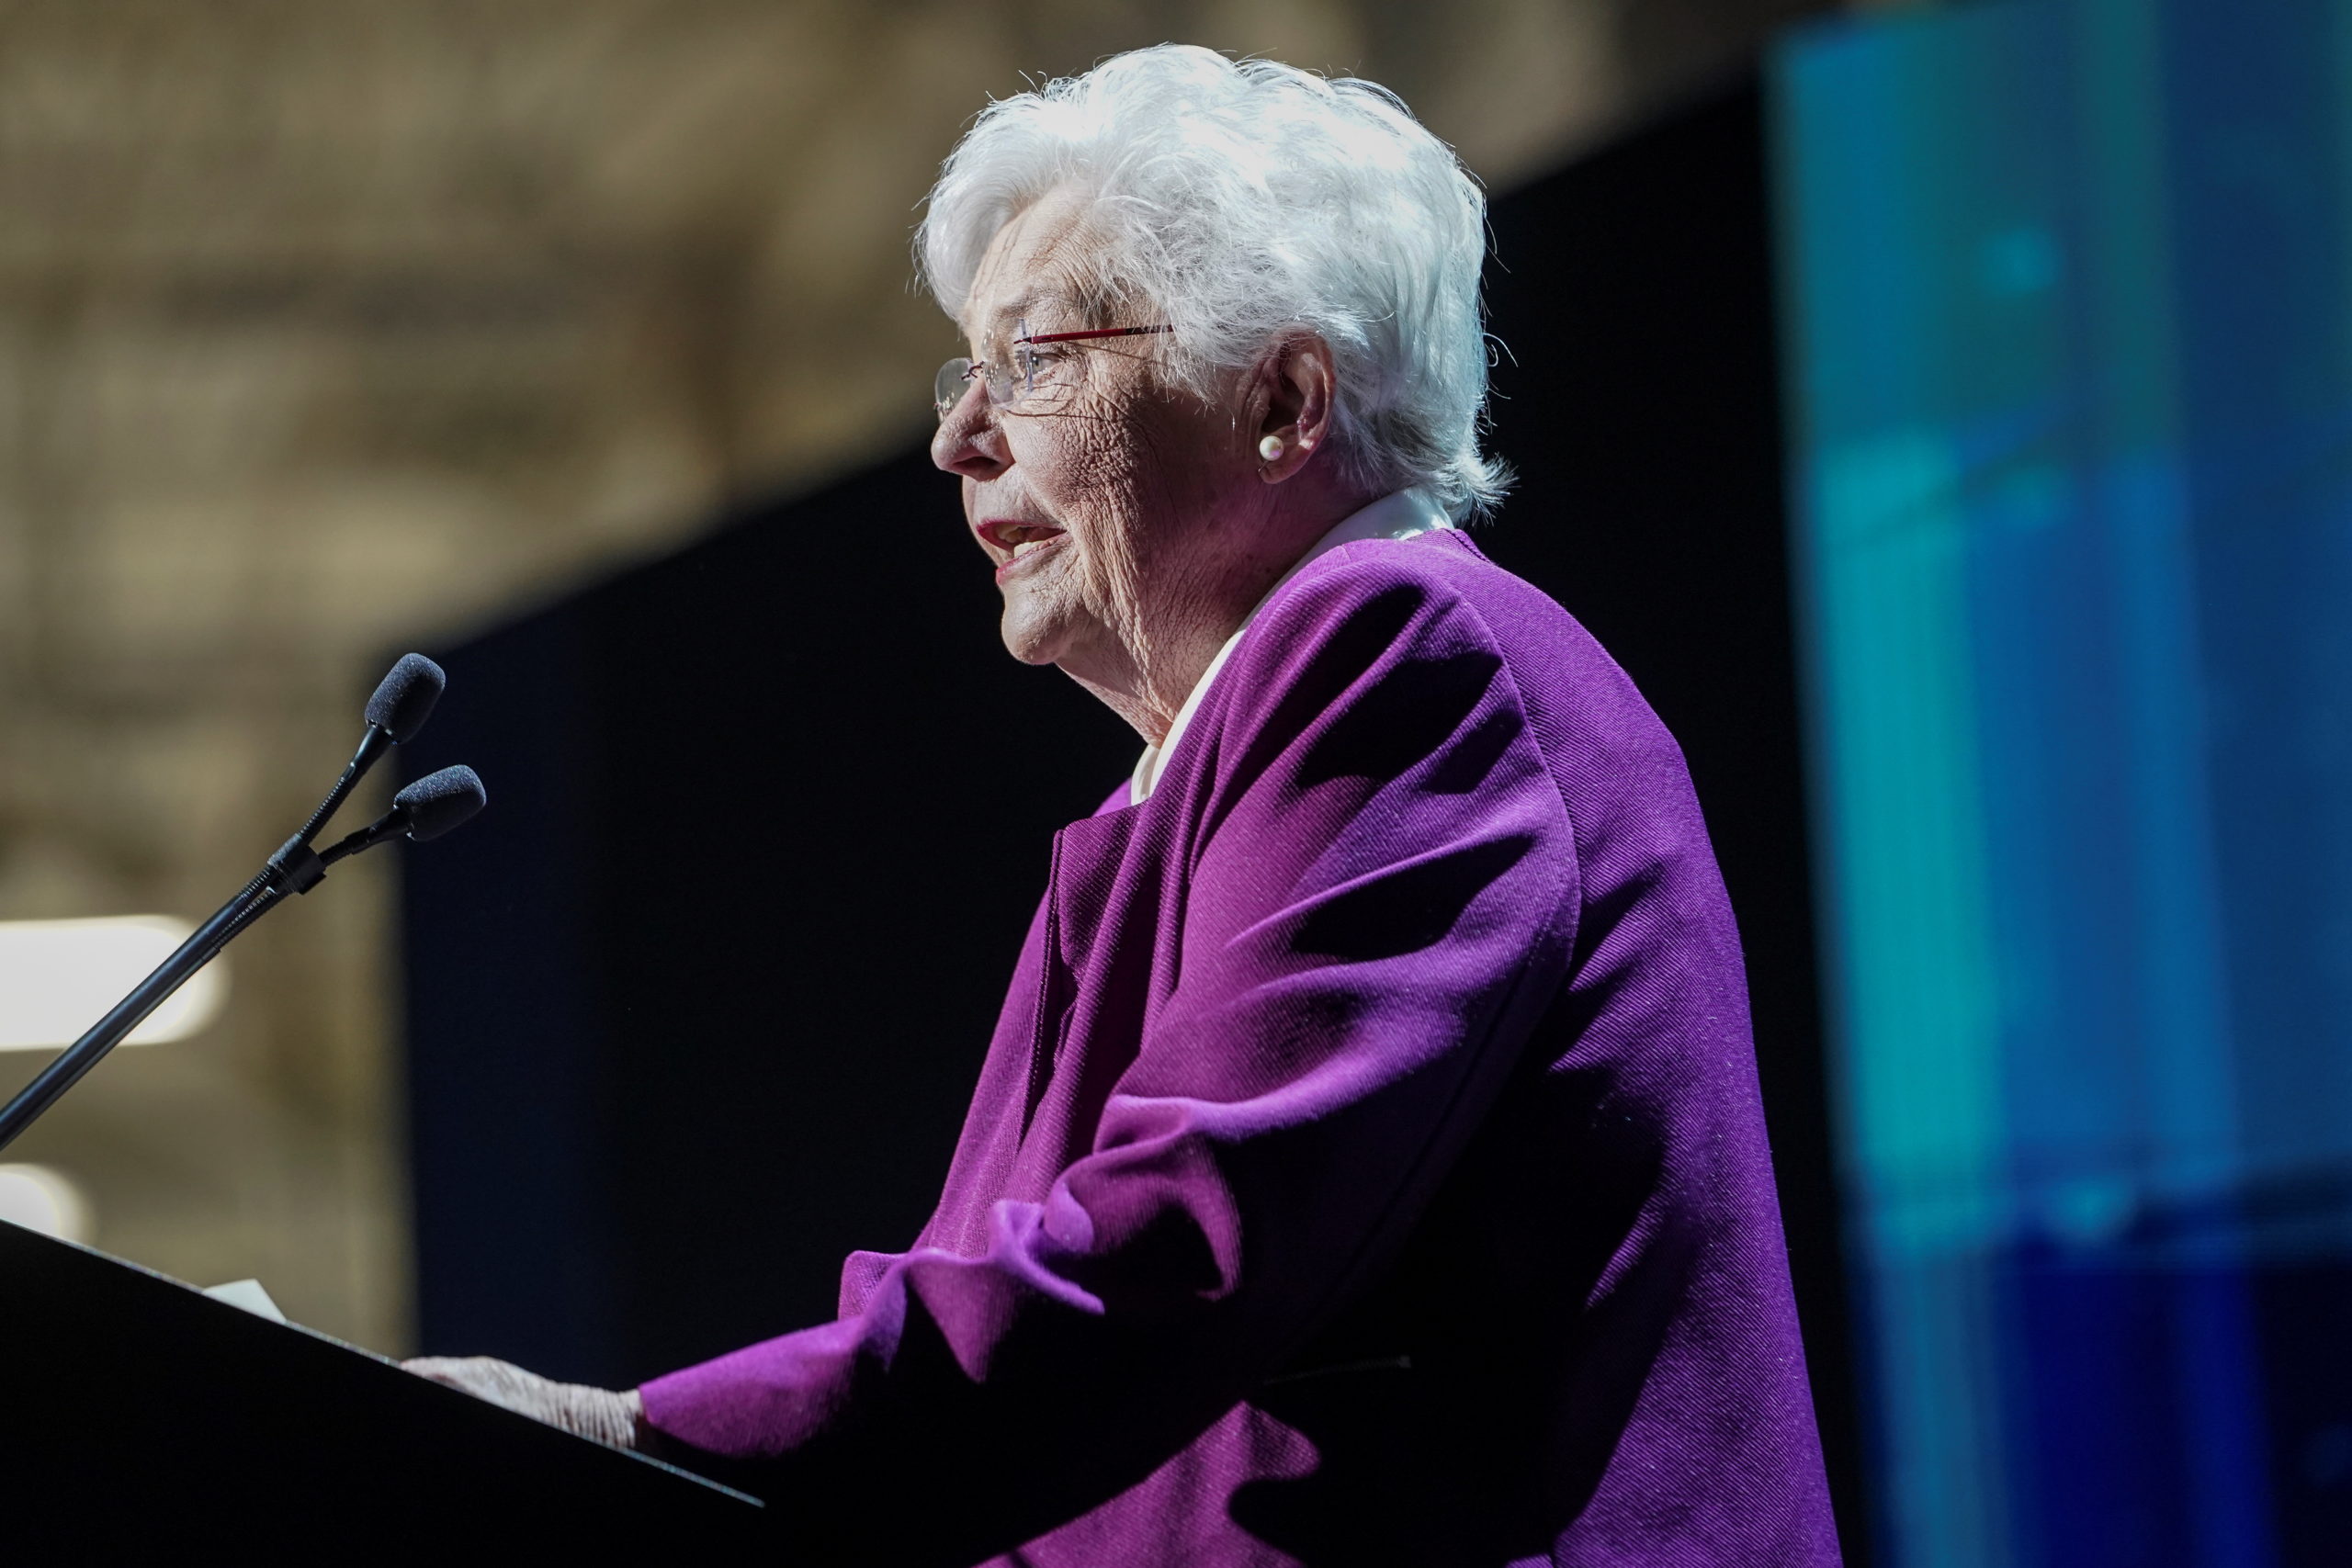 Alabama Governor Kay Ivey speaks during a presentation at the opening of a Mercedes-Benz electric vehicle Battery Factory, marking one of only seven locations producing batteries for their fully electric Mercedes-EQ models, in Woodstock, Alabama, U.S., March 15, 2022. REUTERS/Elijah Nouvelage